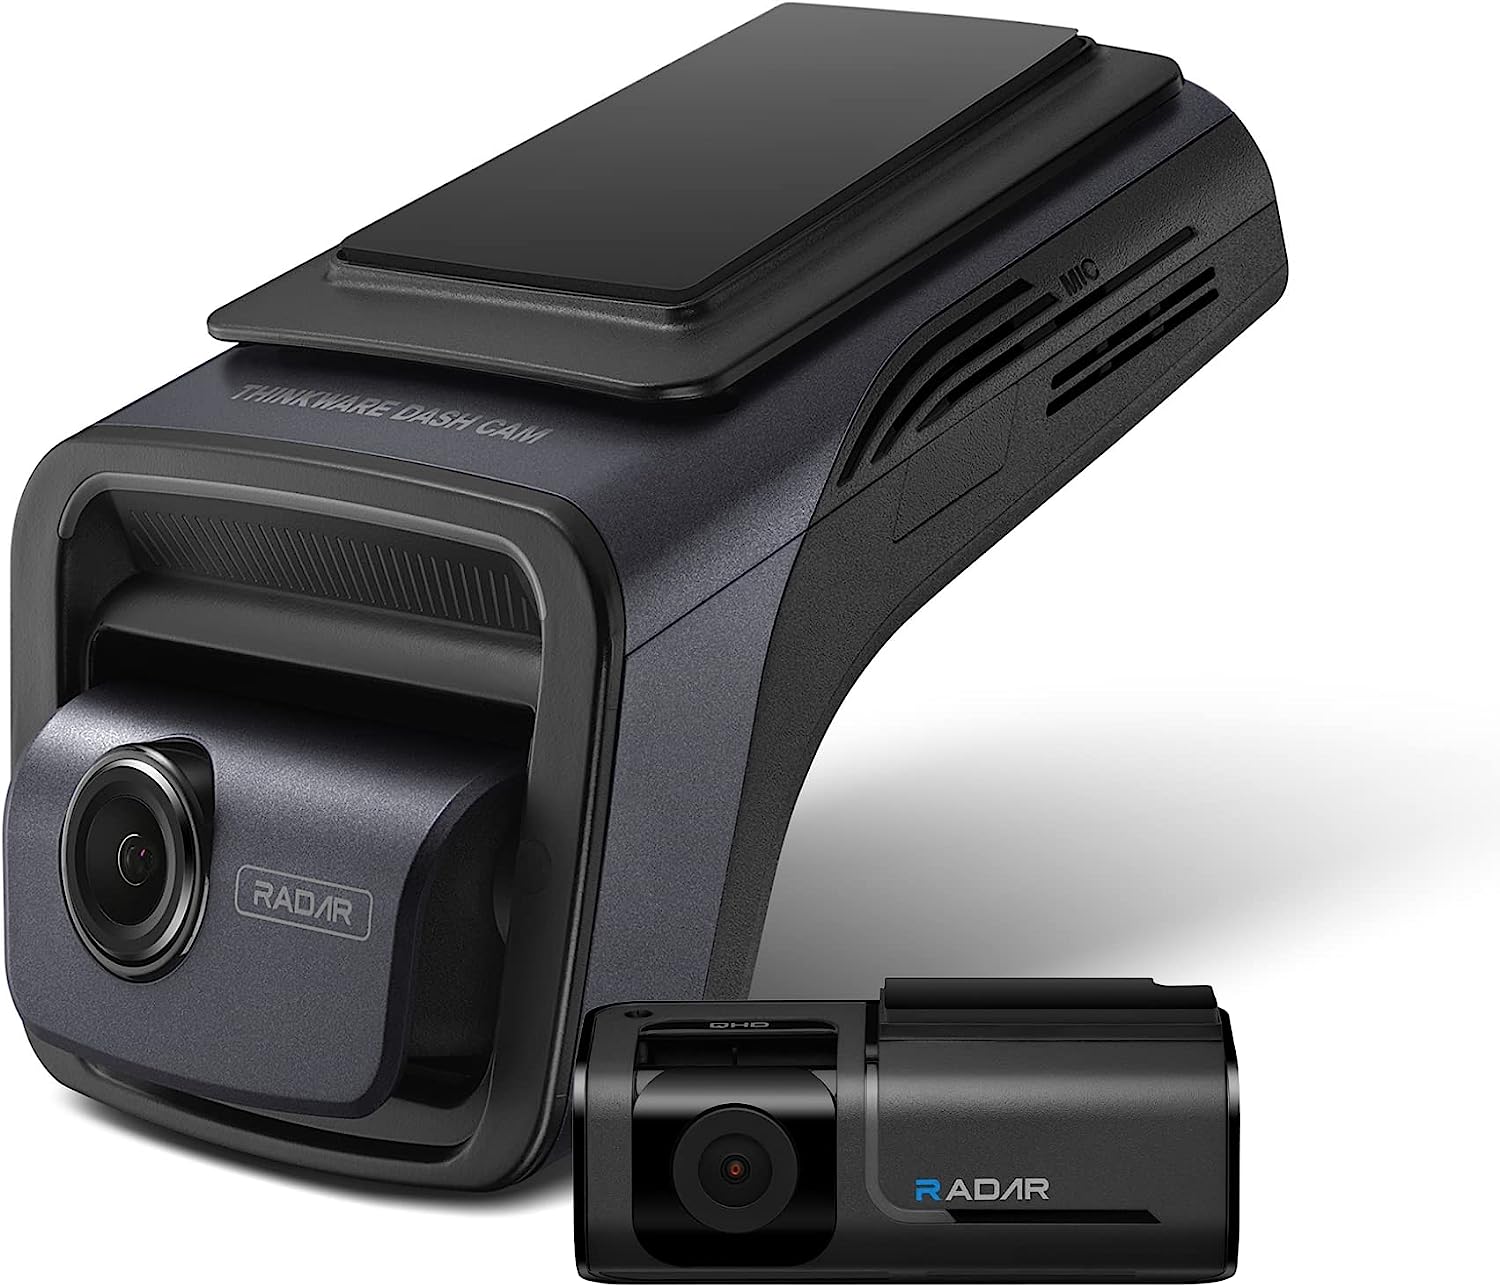 Orskey S900 Dash Cam (Review) 